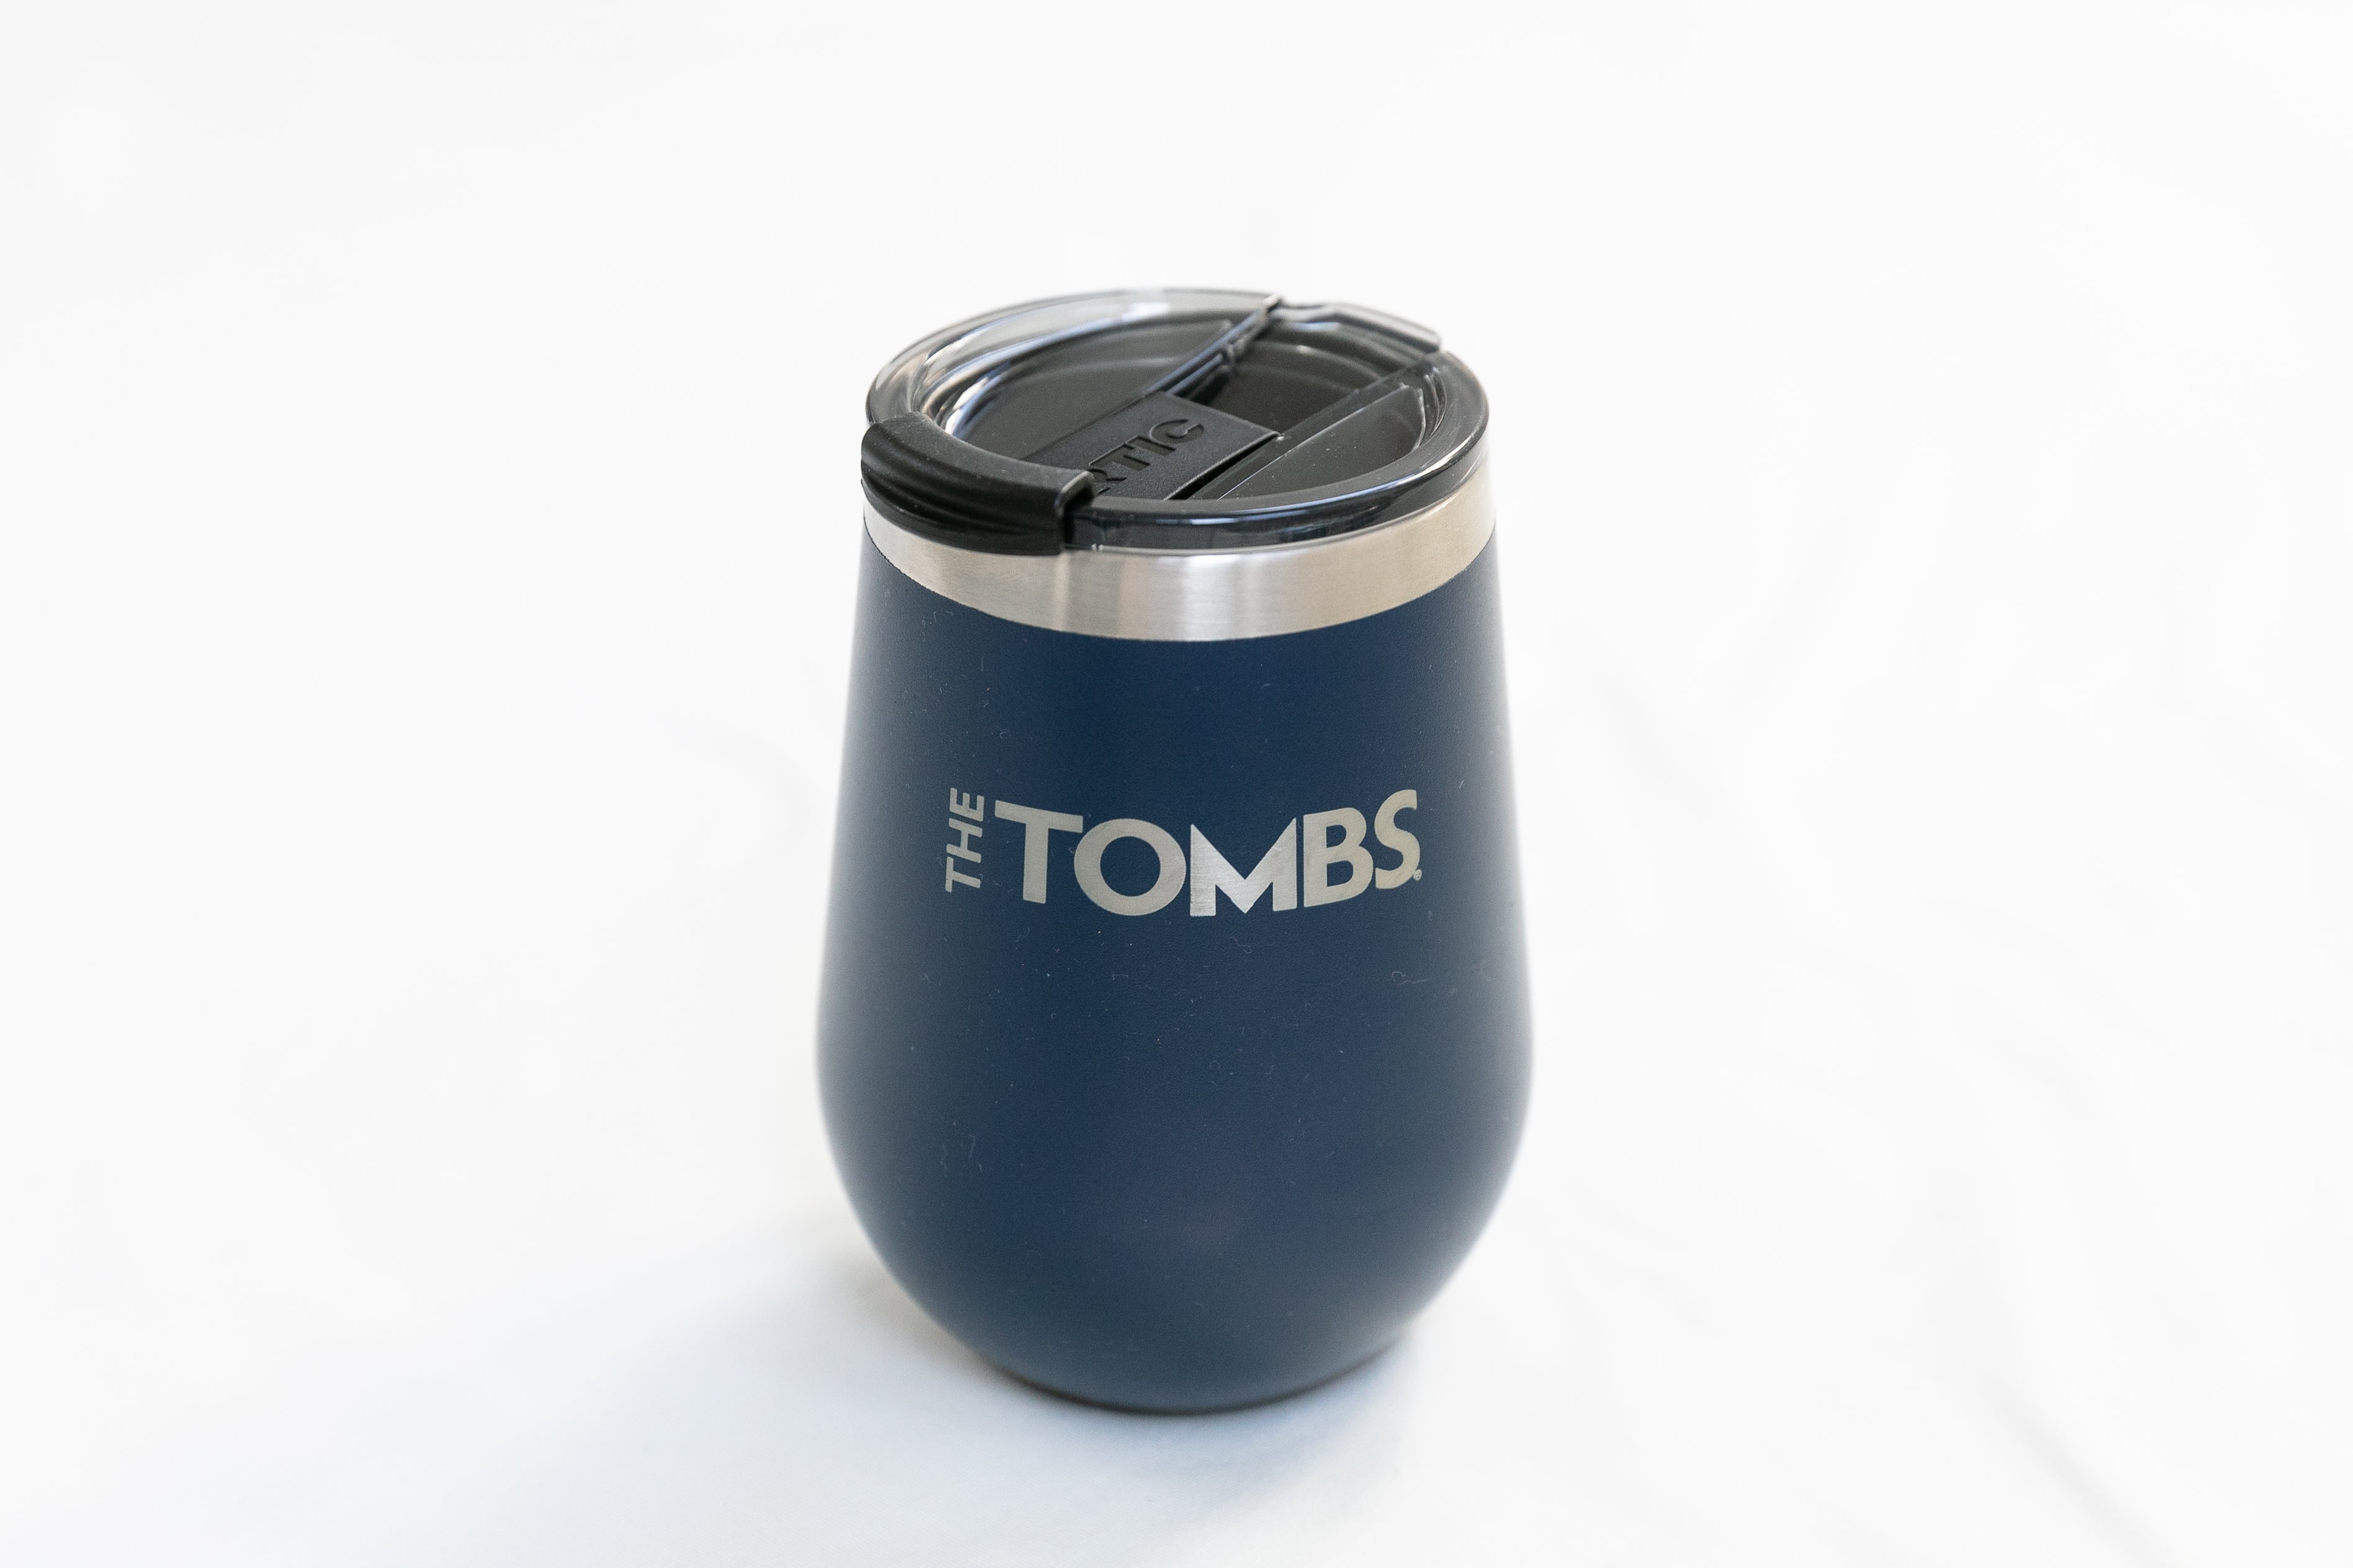 The Tombs Limited Edition RTIC 12 Ounce Cocktail Tumbler